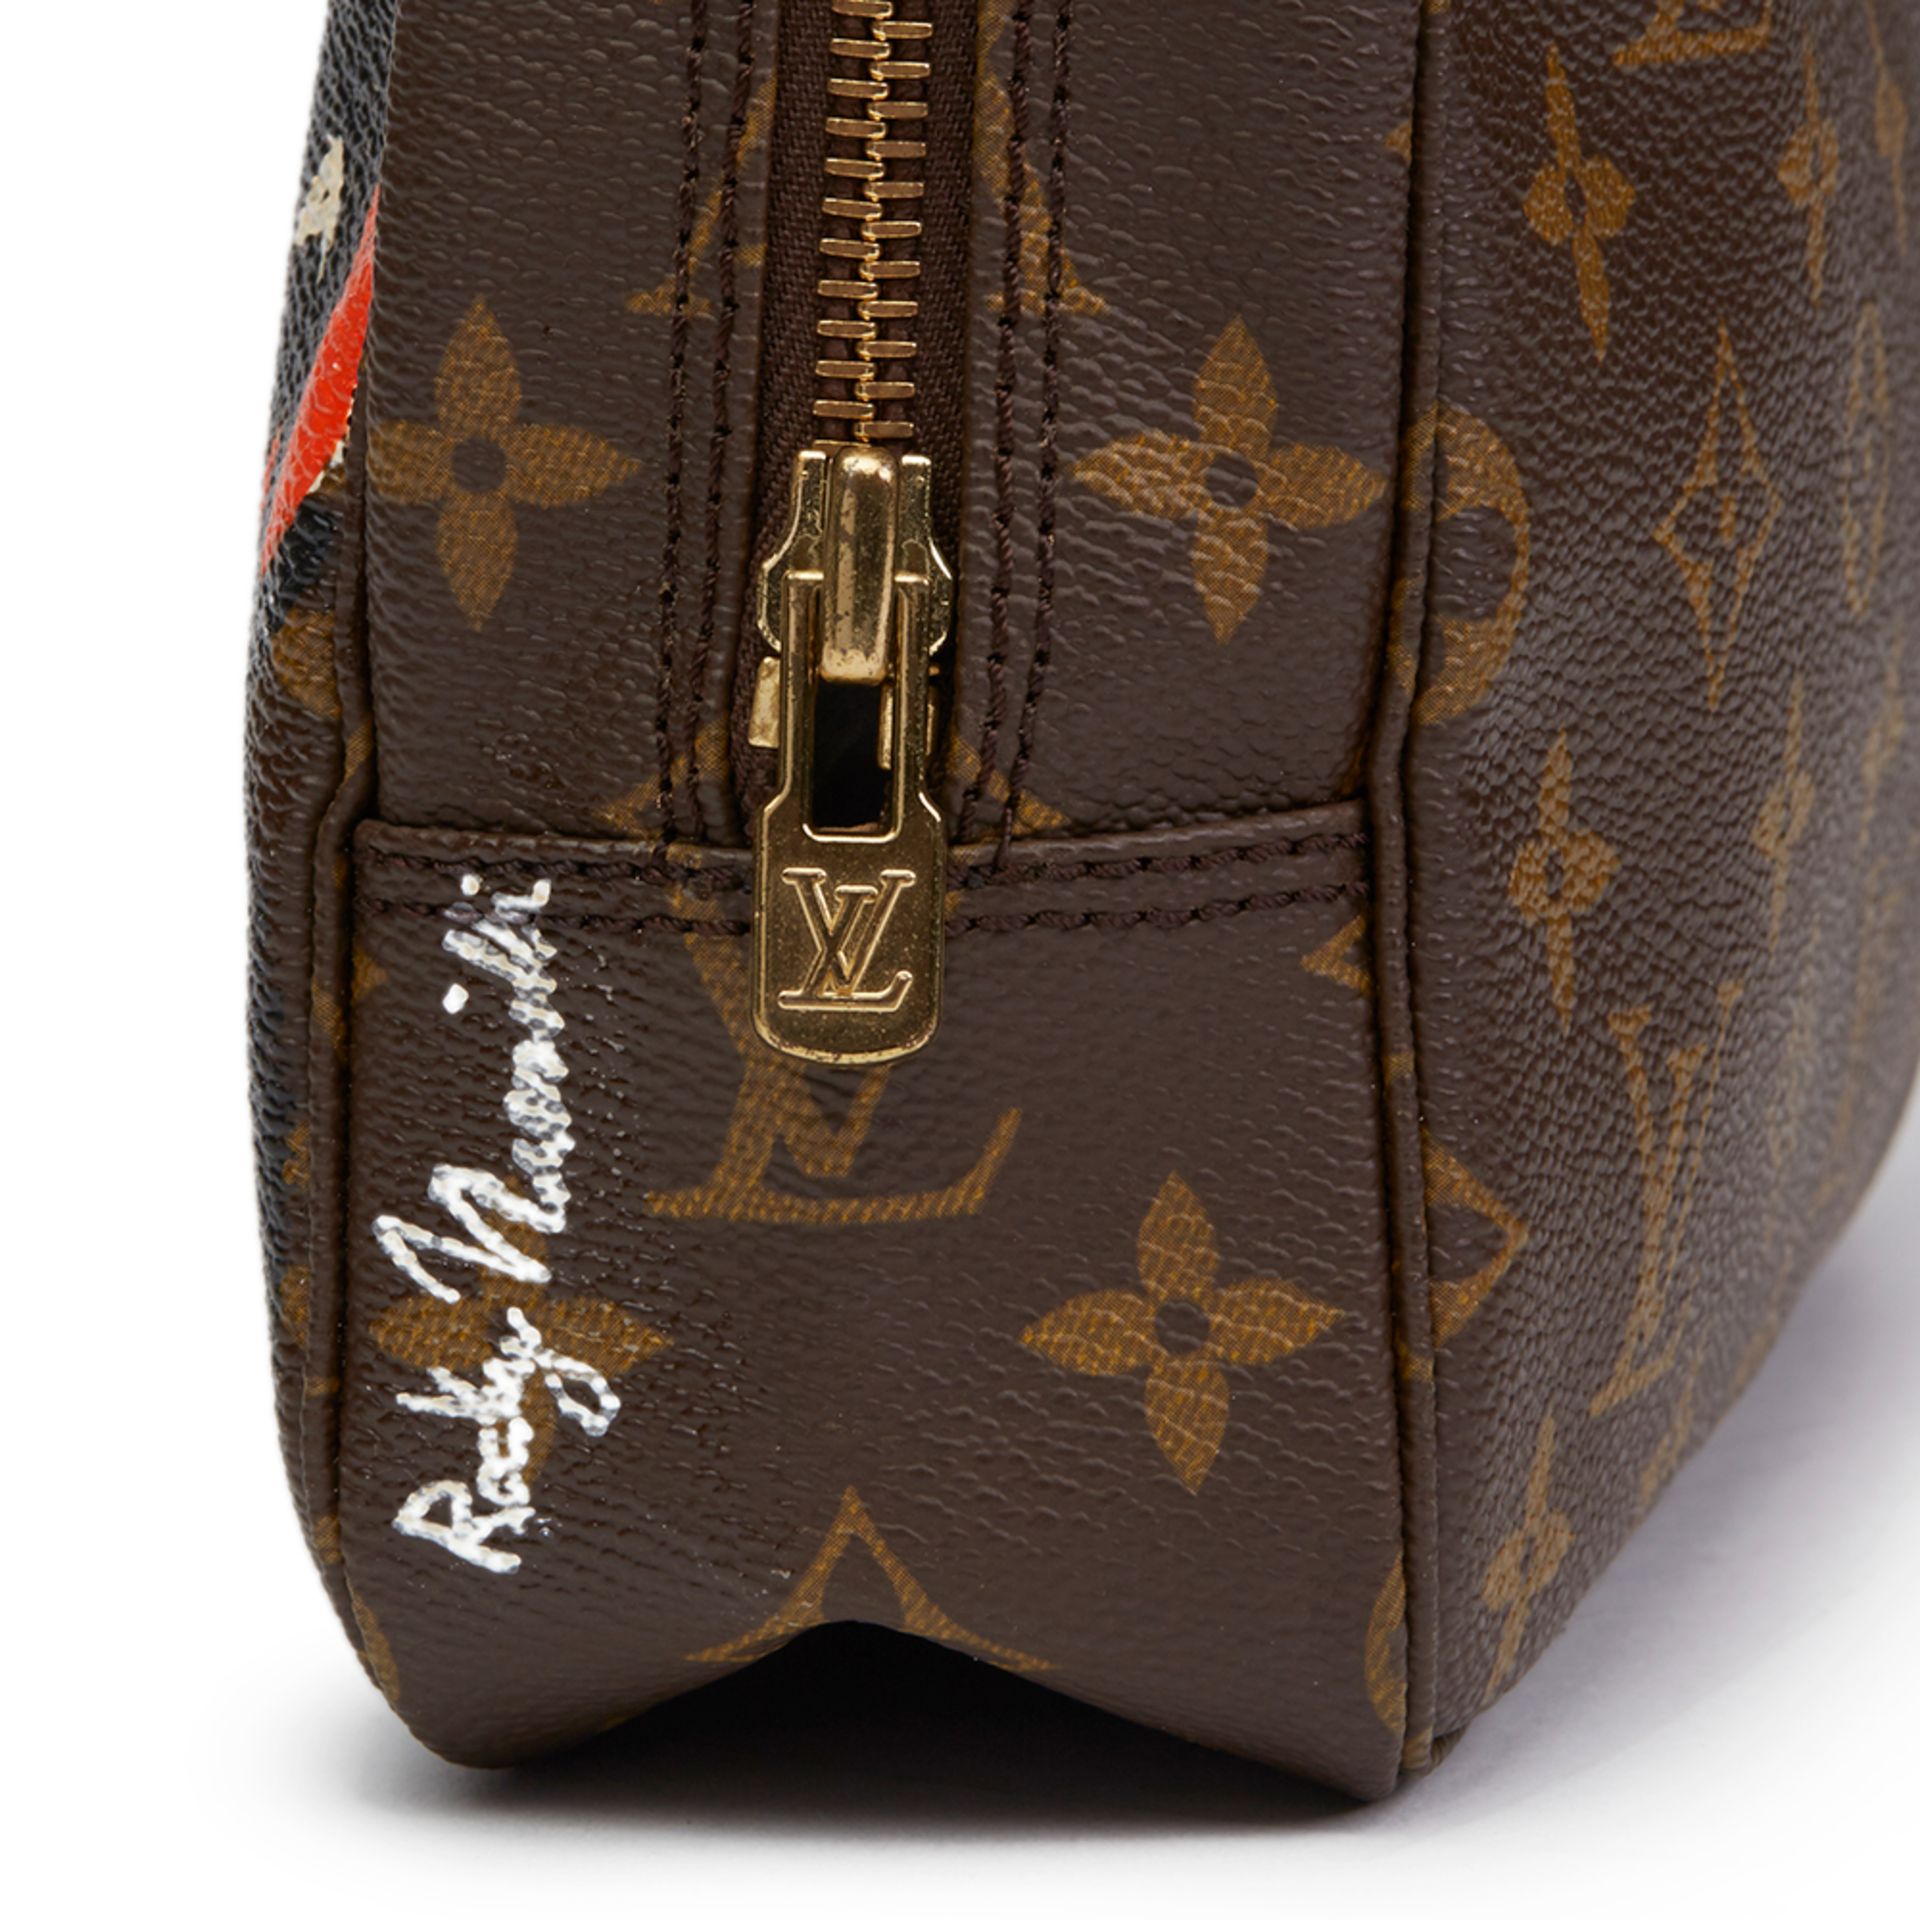 Louis Vuitton Hand-painted 'Sick of it all' X Year Zero London Toiletry Pouch - Image 10 of 11